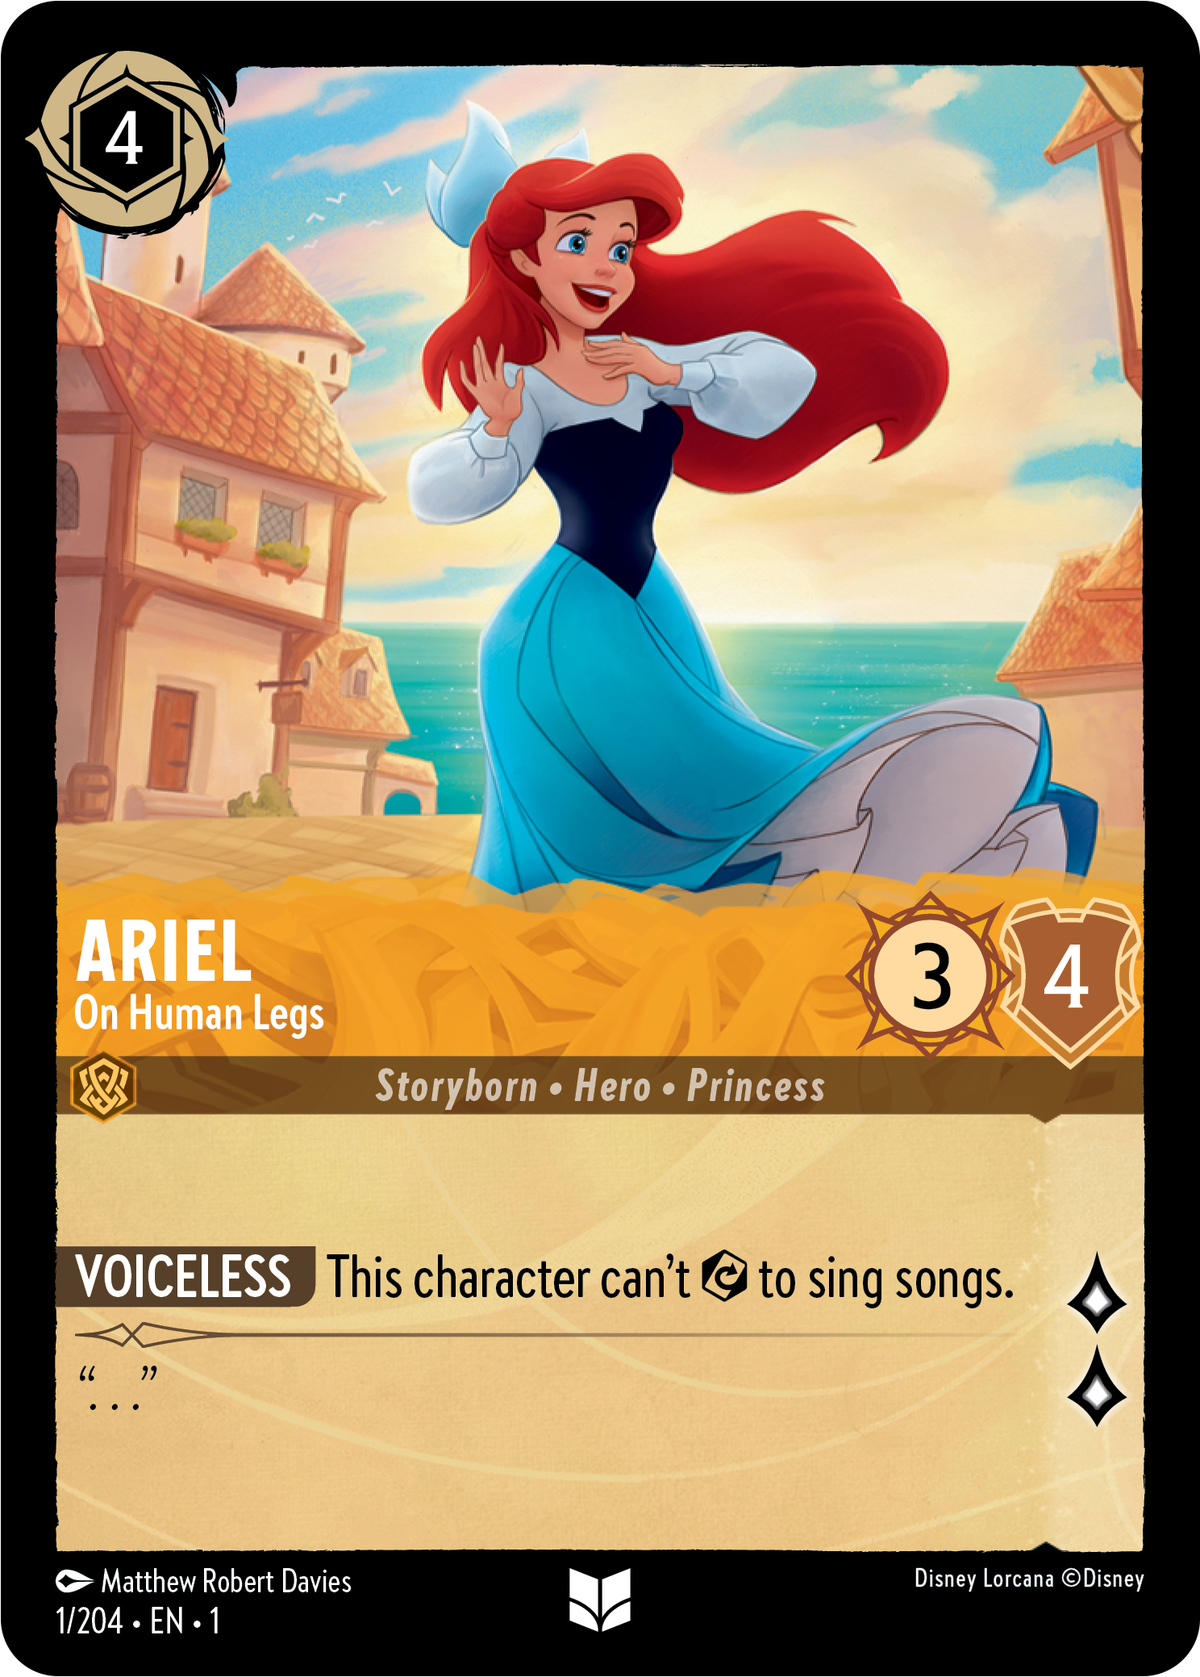 Ariel’s “On Human Legs” card in Disney Lorcana, portraying the mermaid in her human form, unable to sing songs